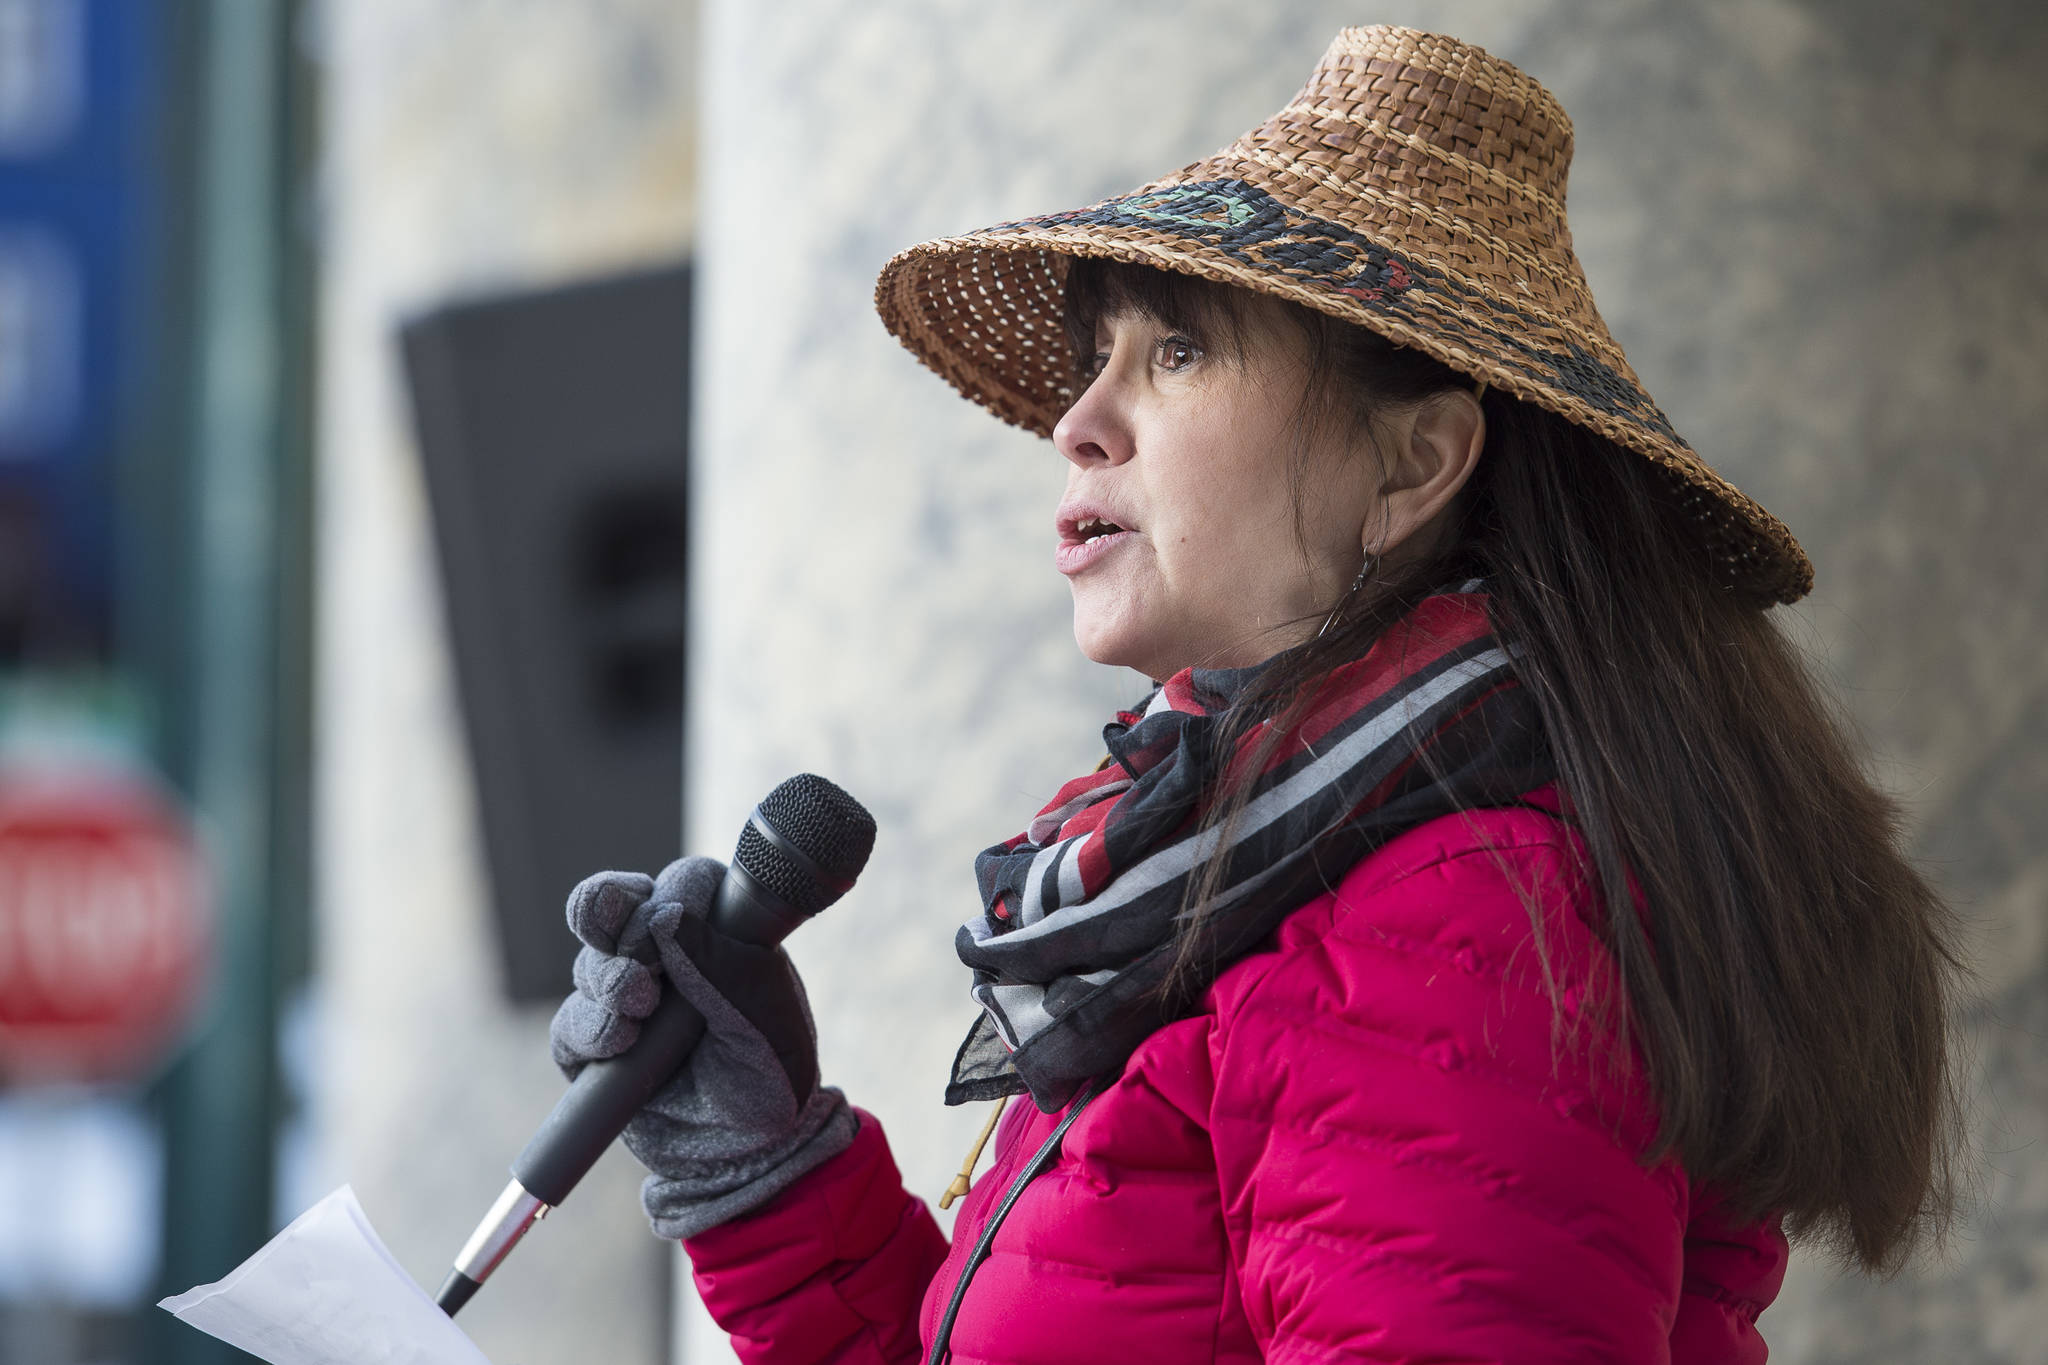 Sandy Edwardson speaks at the Women’s March on Juneau in front of the Alaska State Capitol on Saturday, Jan. 19, 2019. (Michael Penn | Juneau Empire)